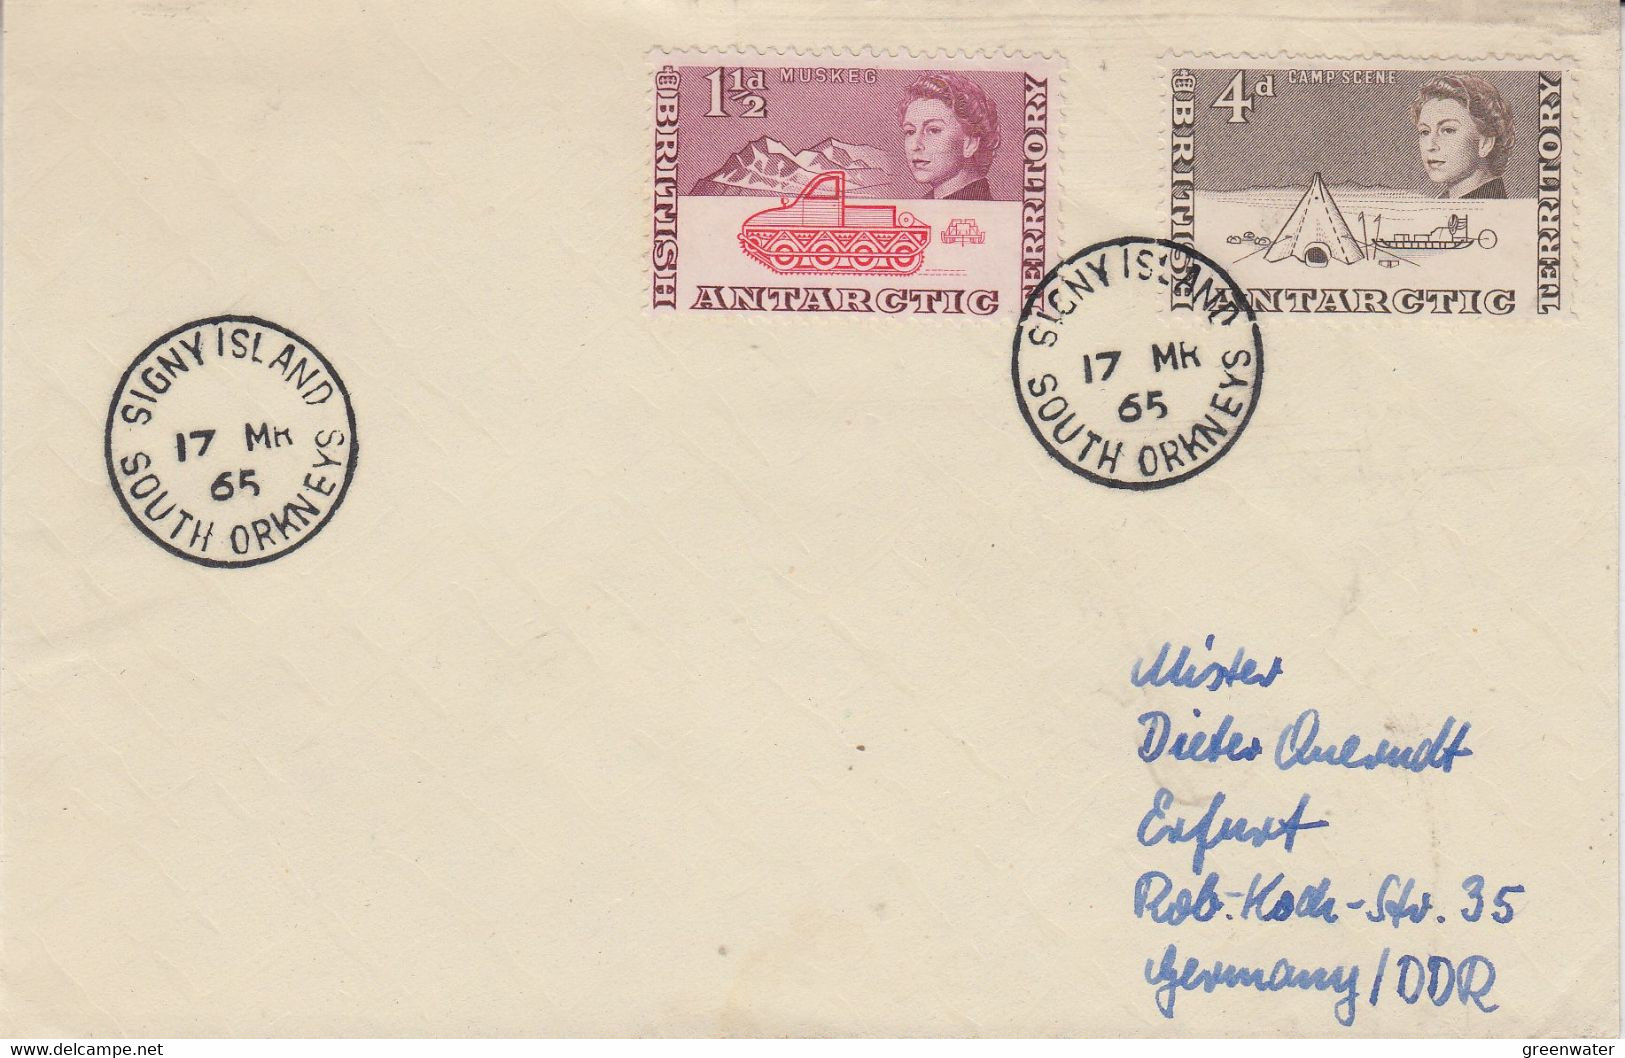 British Antarctic Territories (BAT) Cover Ca Signy Island South Orkneys 17 MR 1965  (TA163) - Covers & Documents